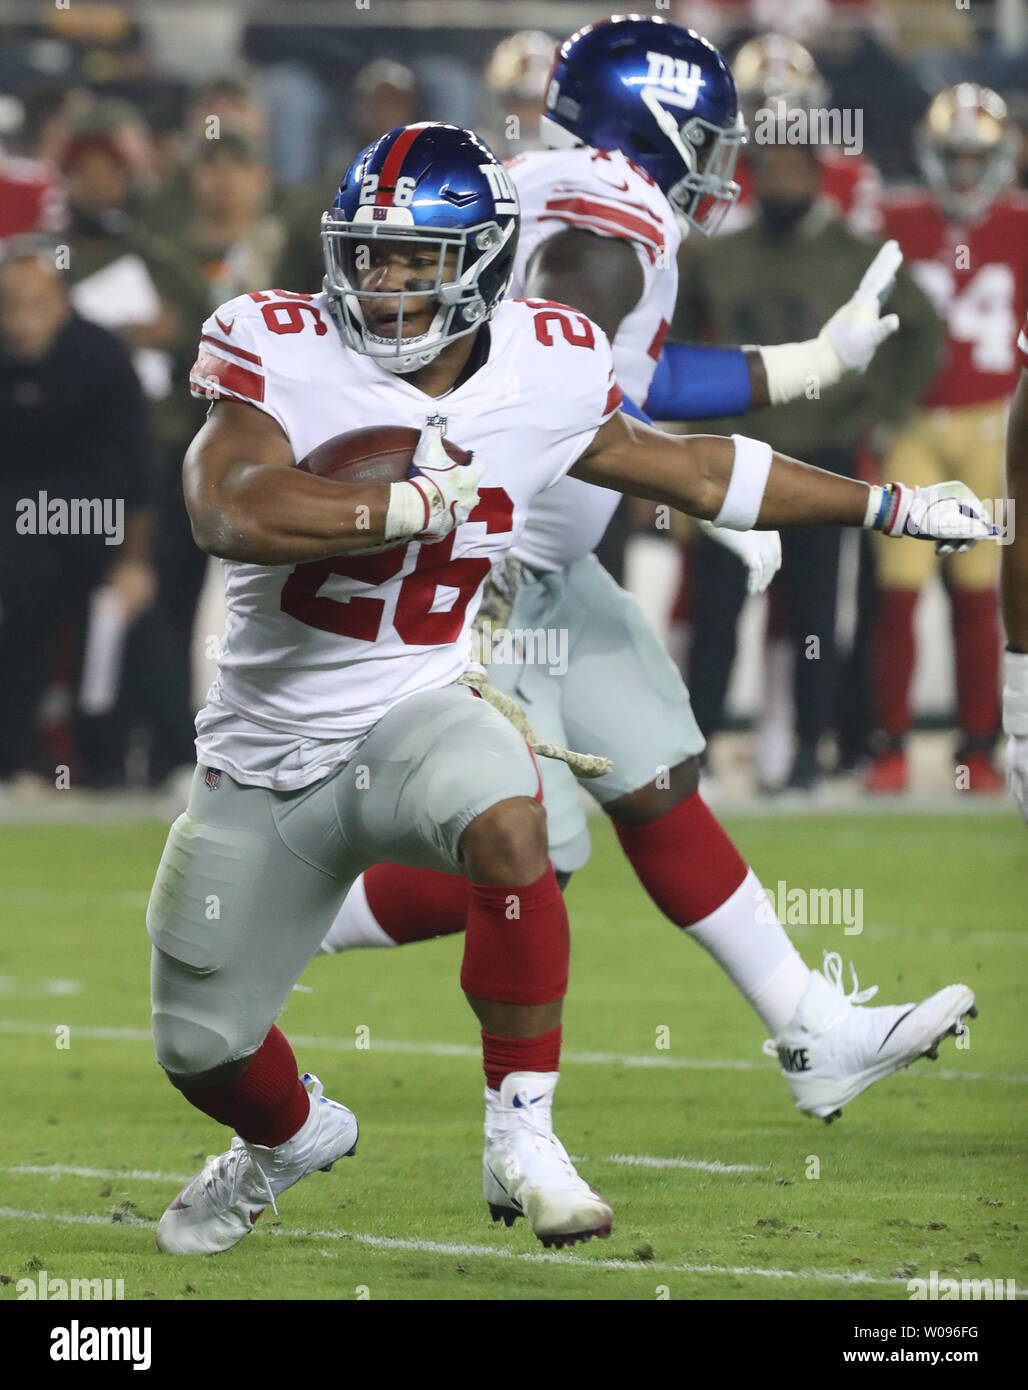 Giants running back Saquon Barkley gushes over rookie tackle Evan